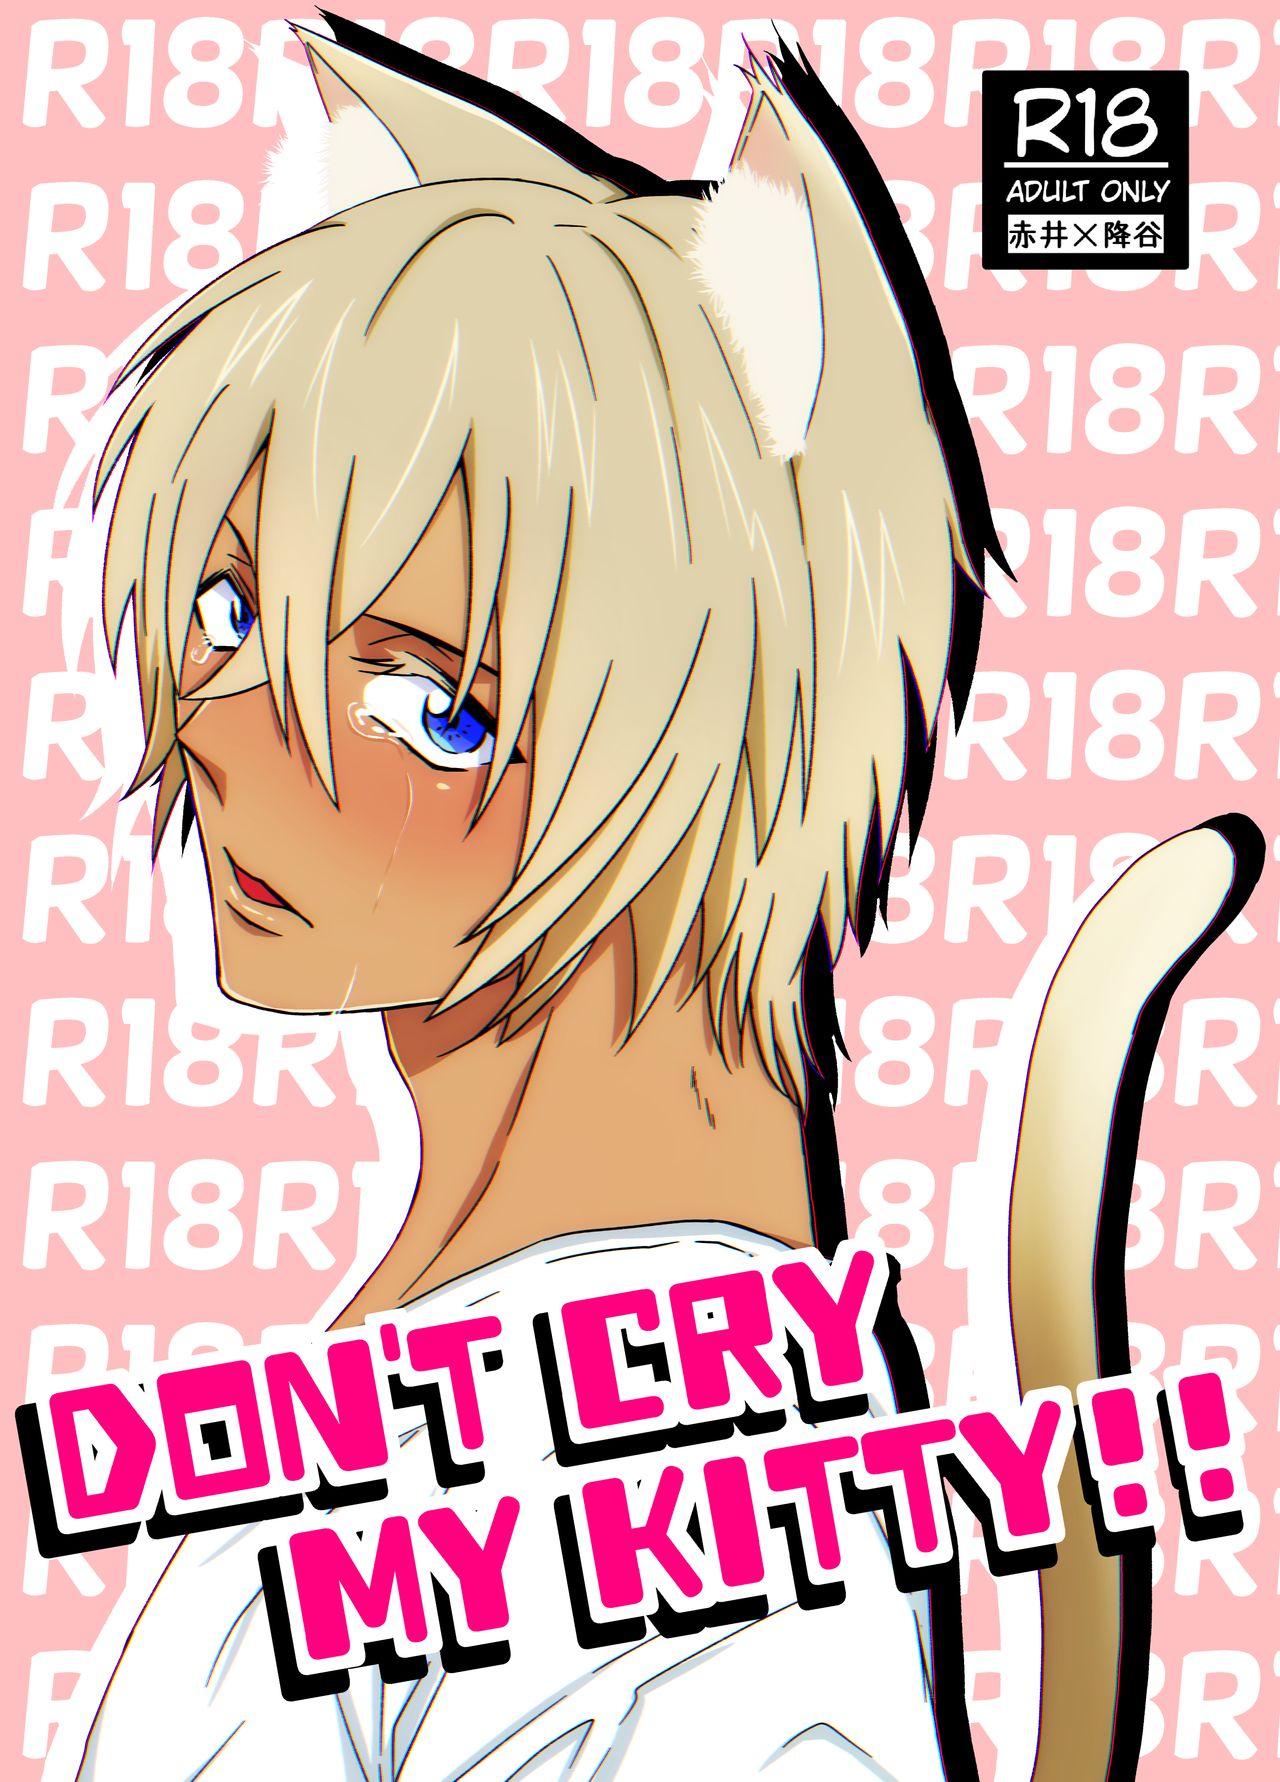 DON'T CRY MY KITTY!! 0